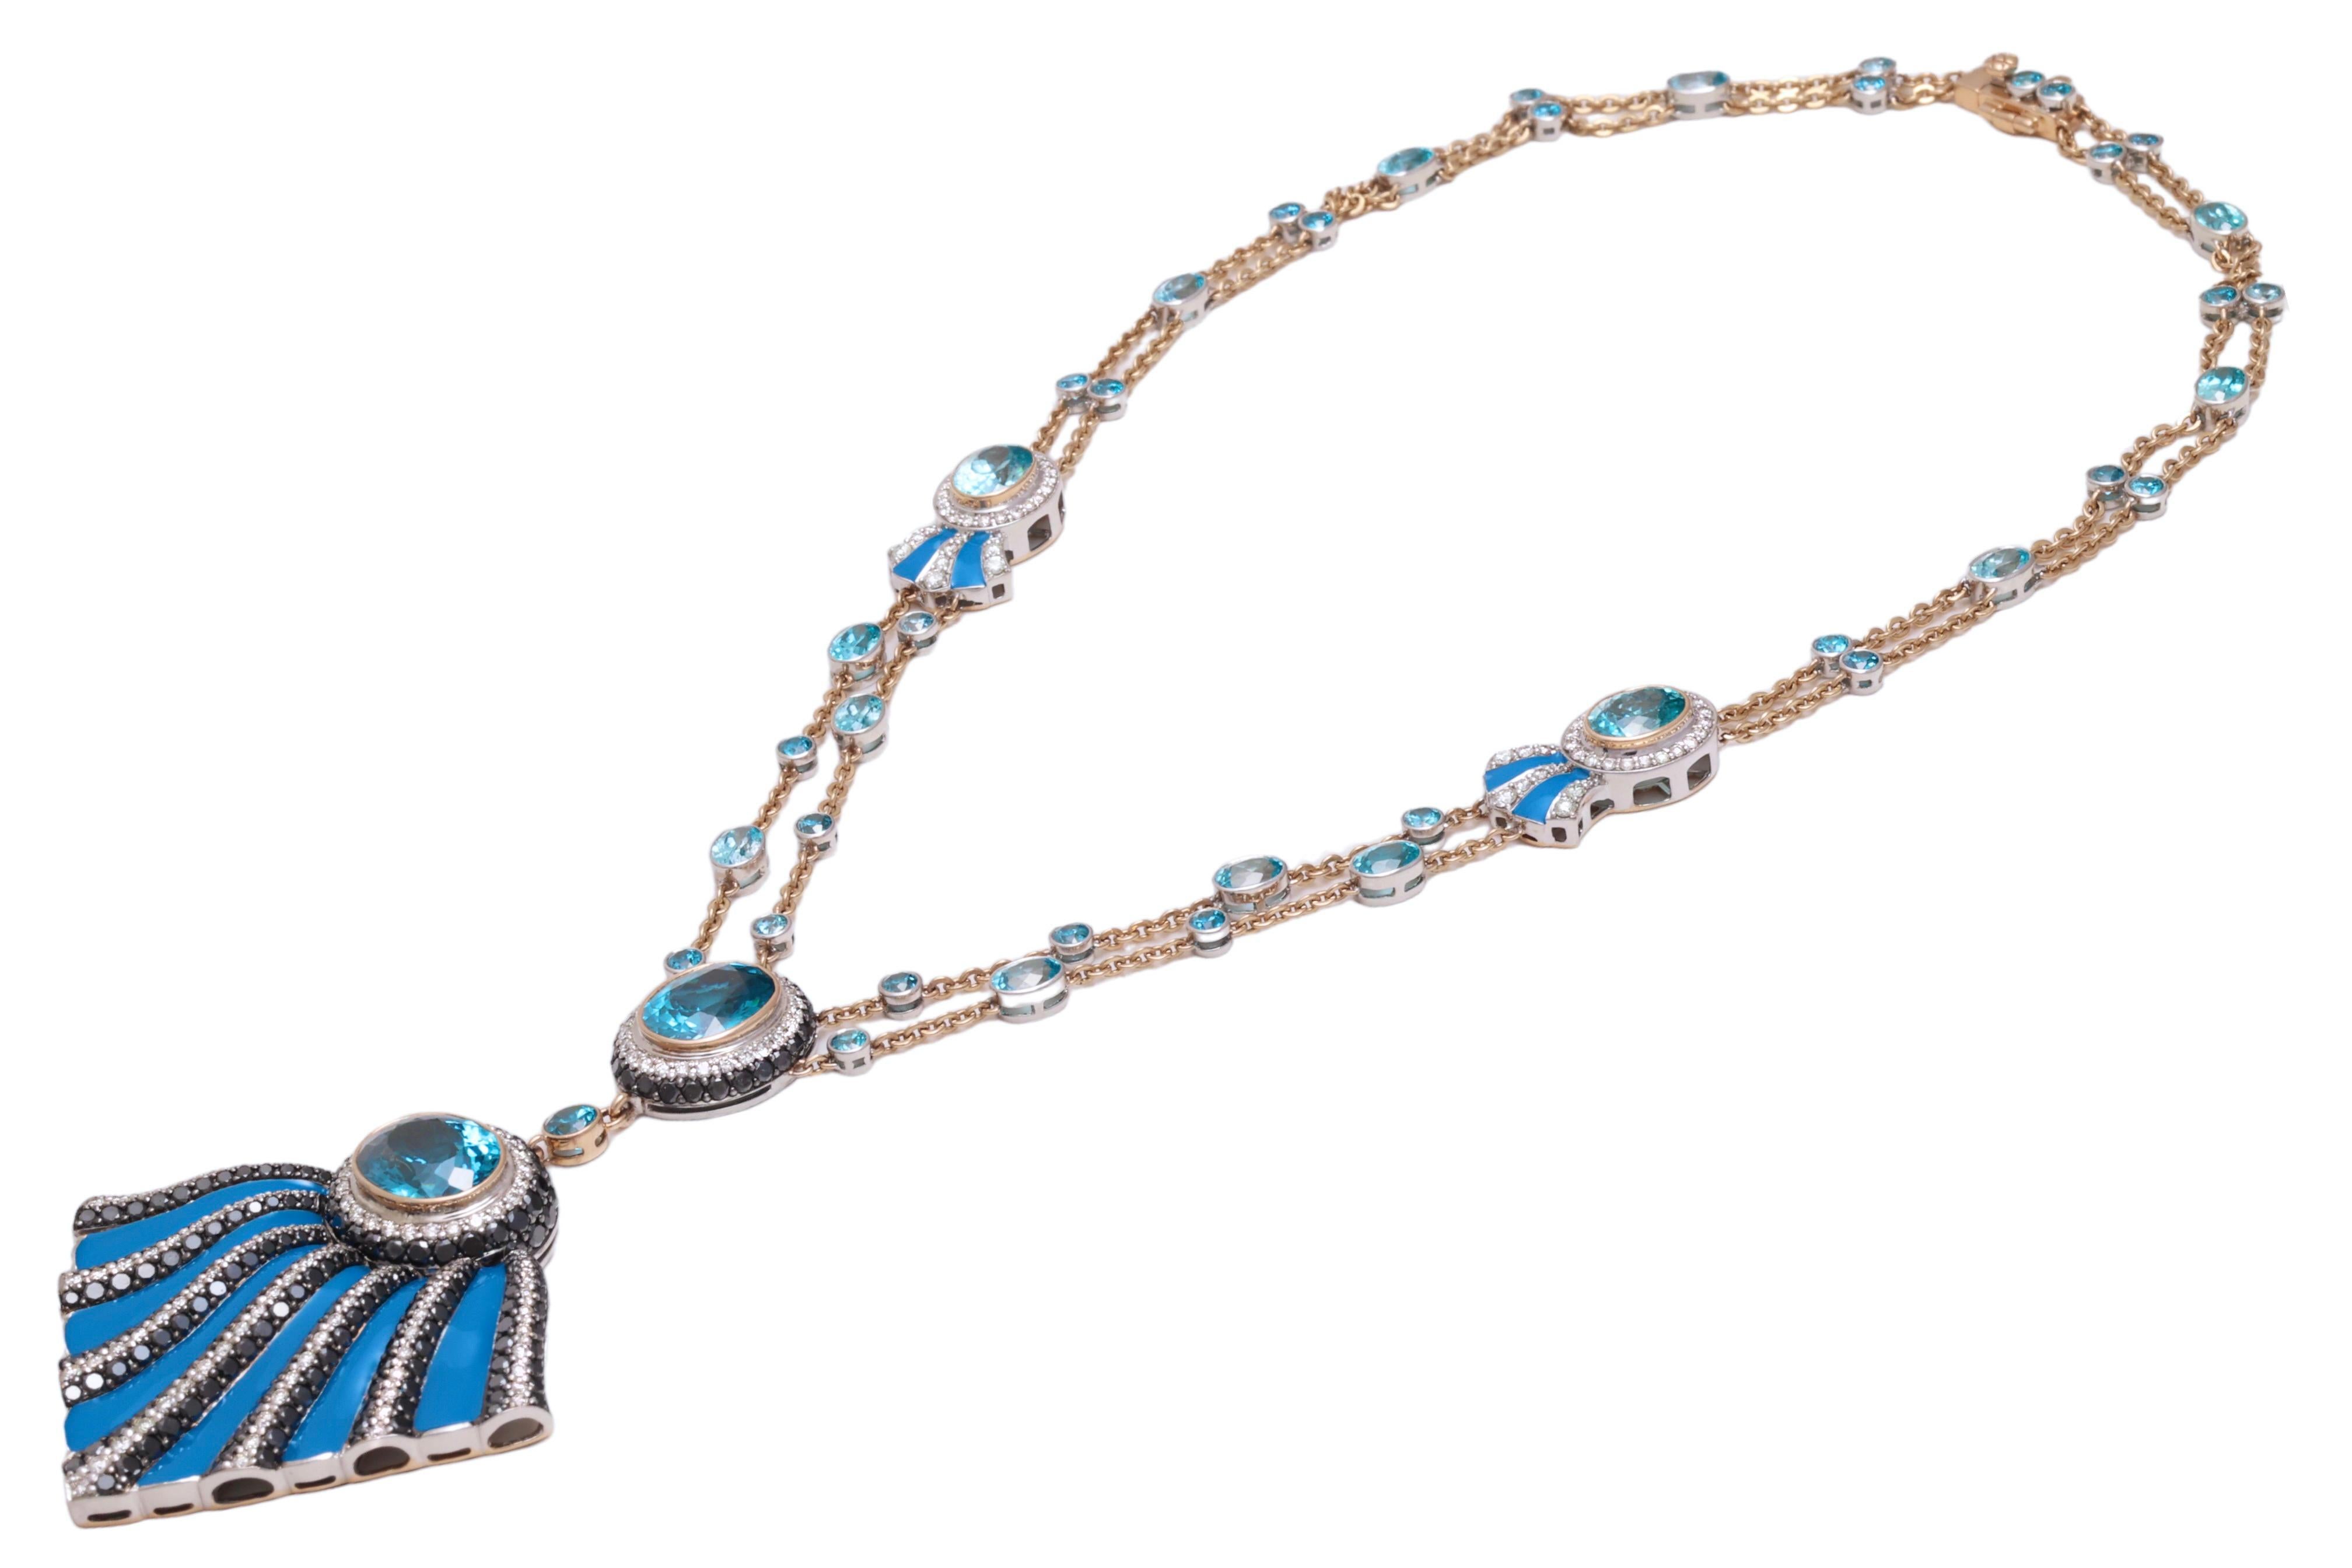 Zorab Creation 18 kt. Gold Necklace With 37 ct. Topaz and 8 ct. bl & wh Diamond For Sale 4